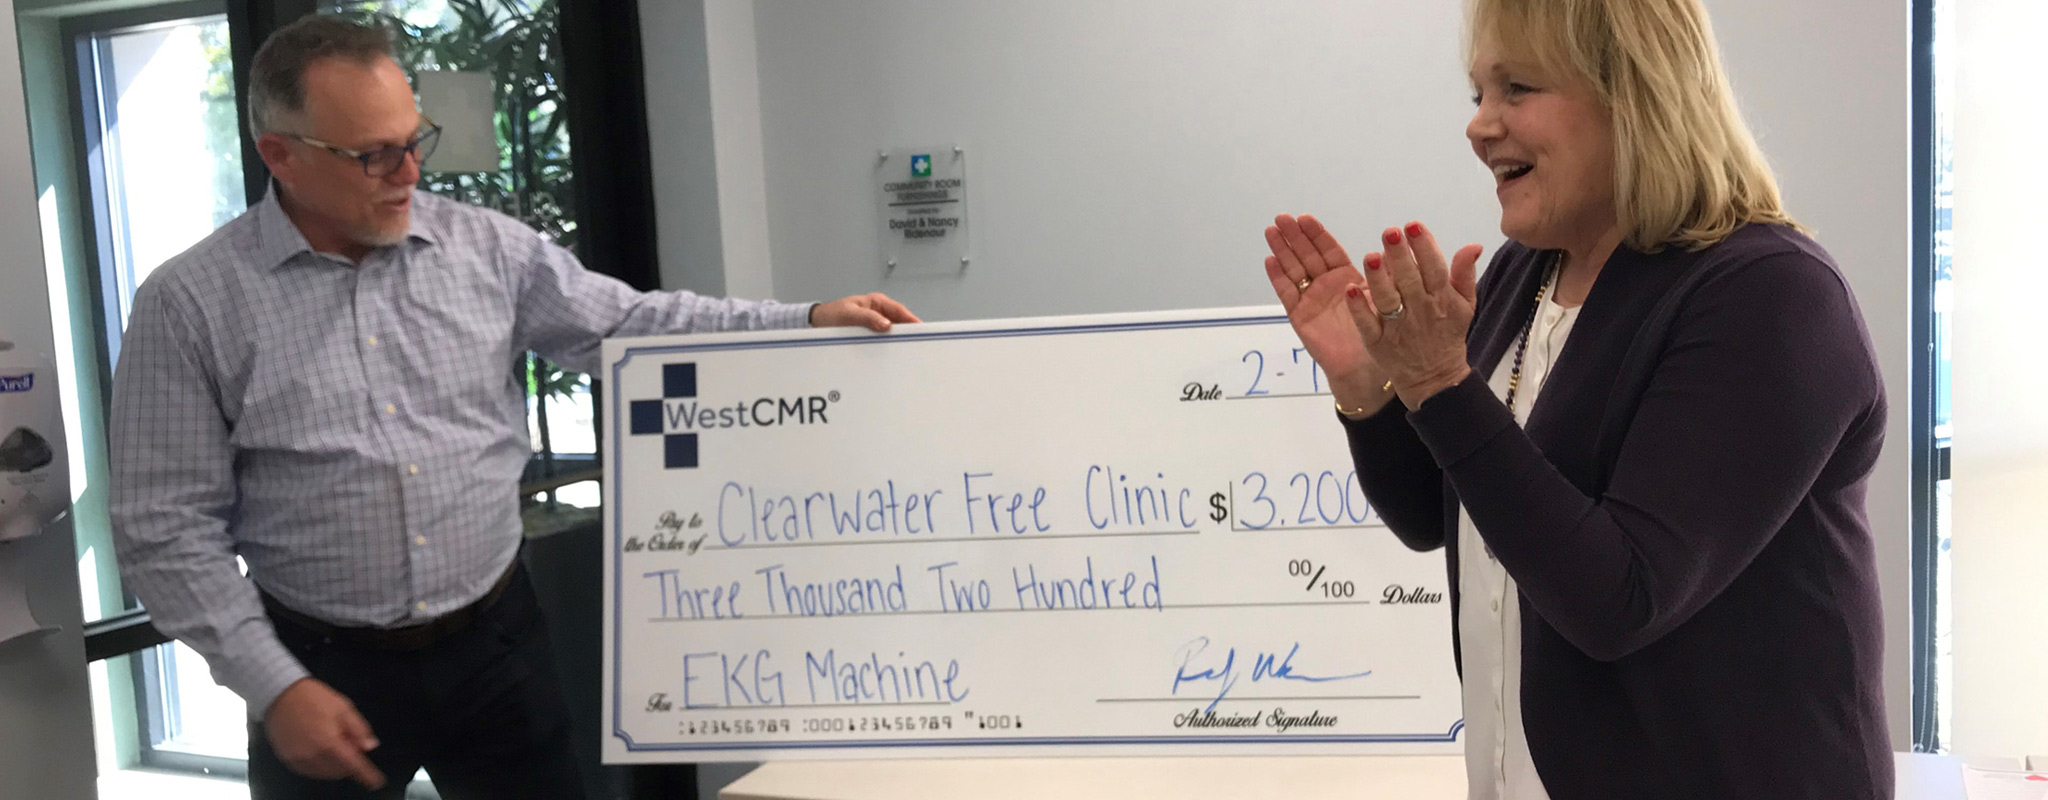 clearwater-free-clinic